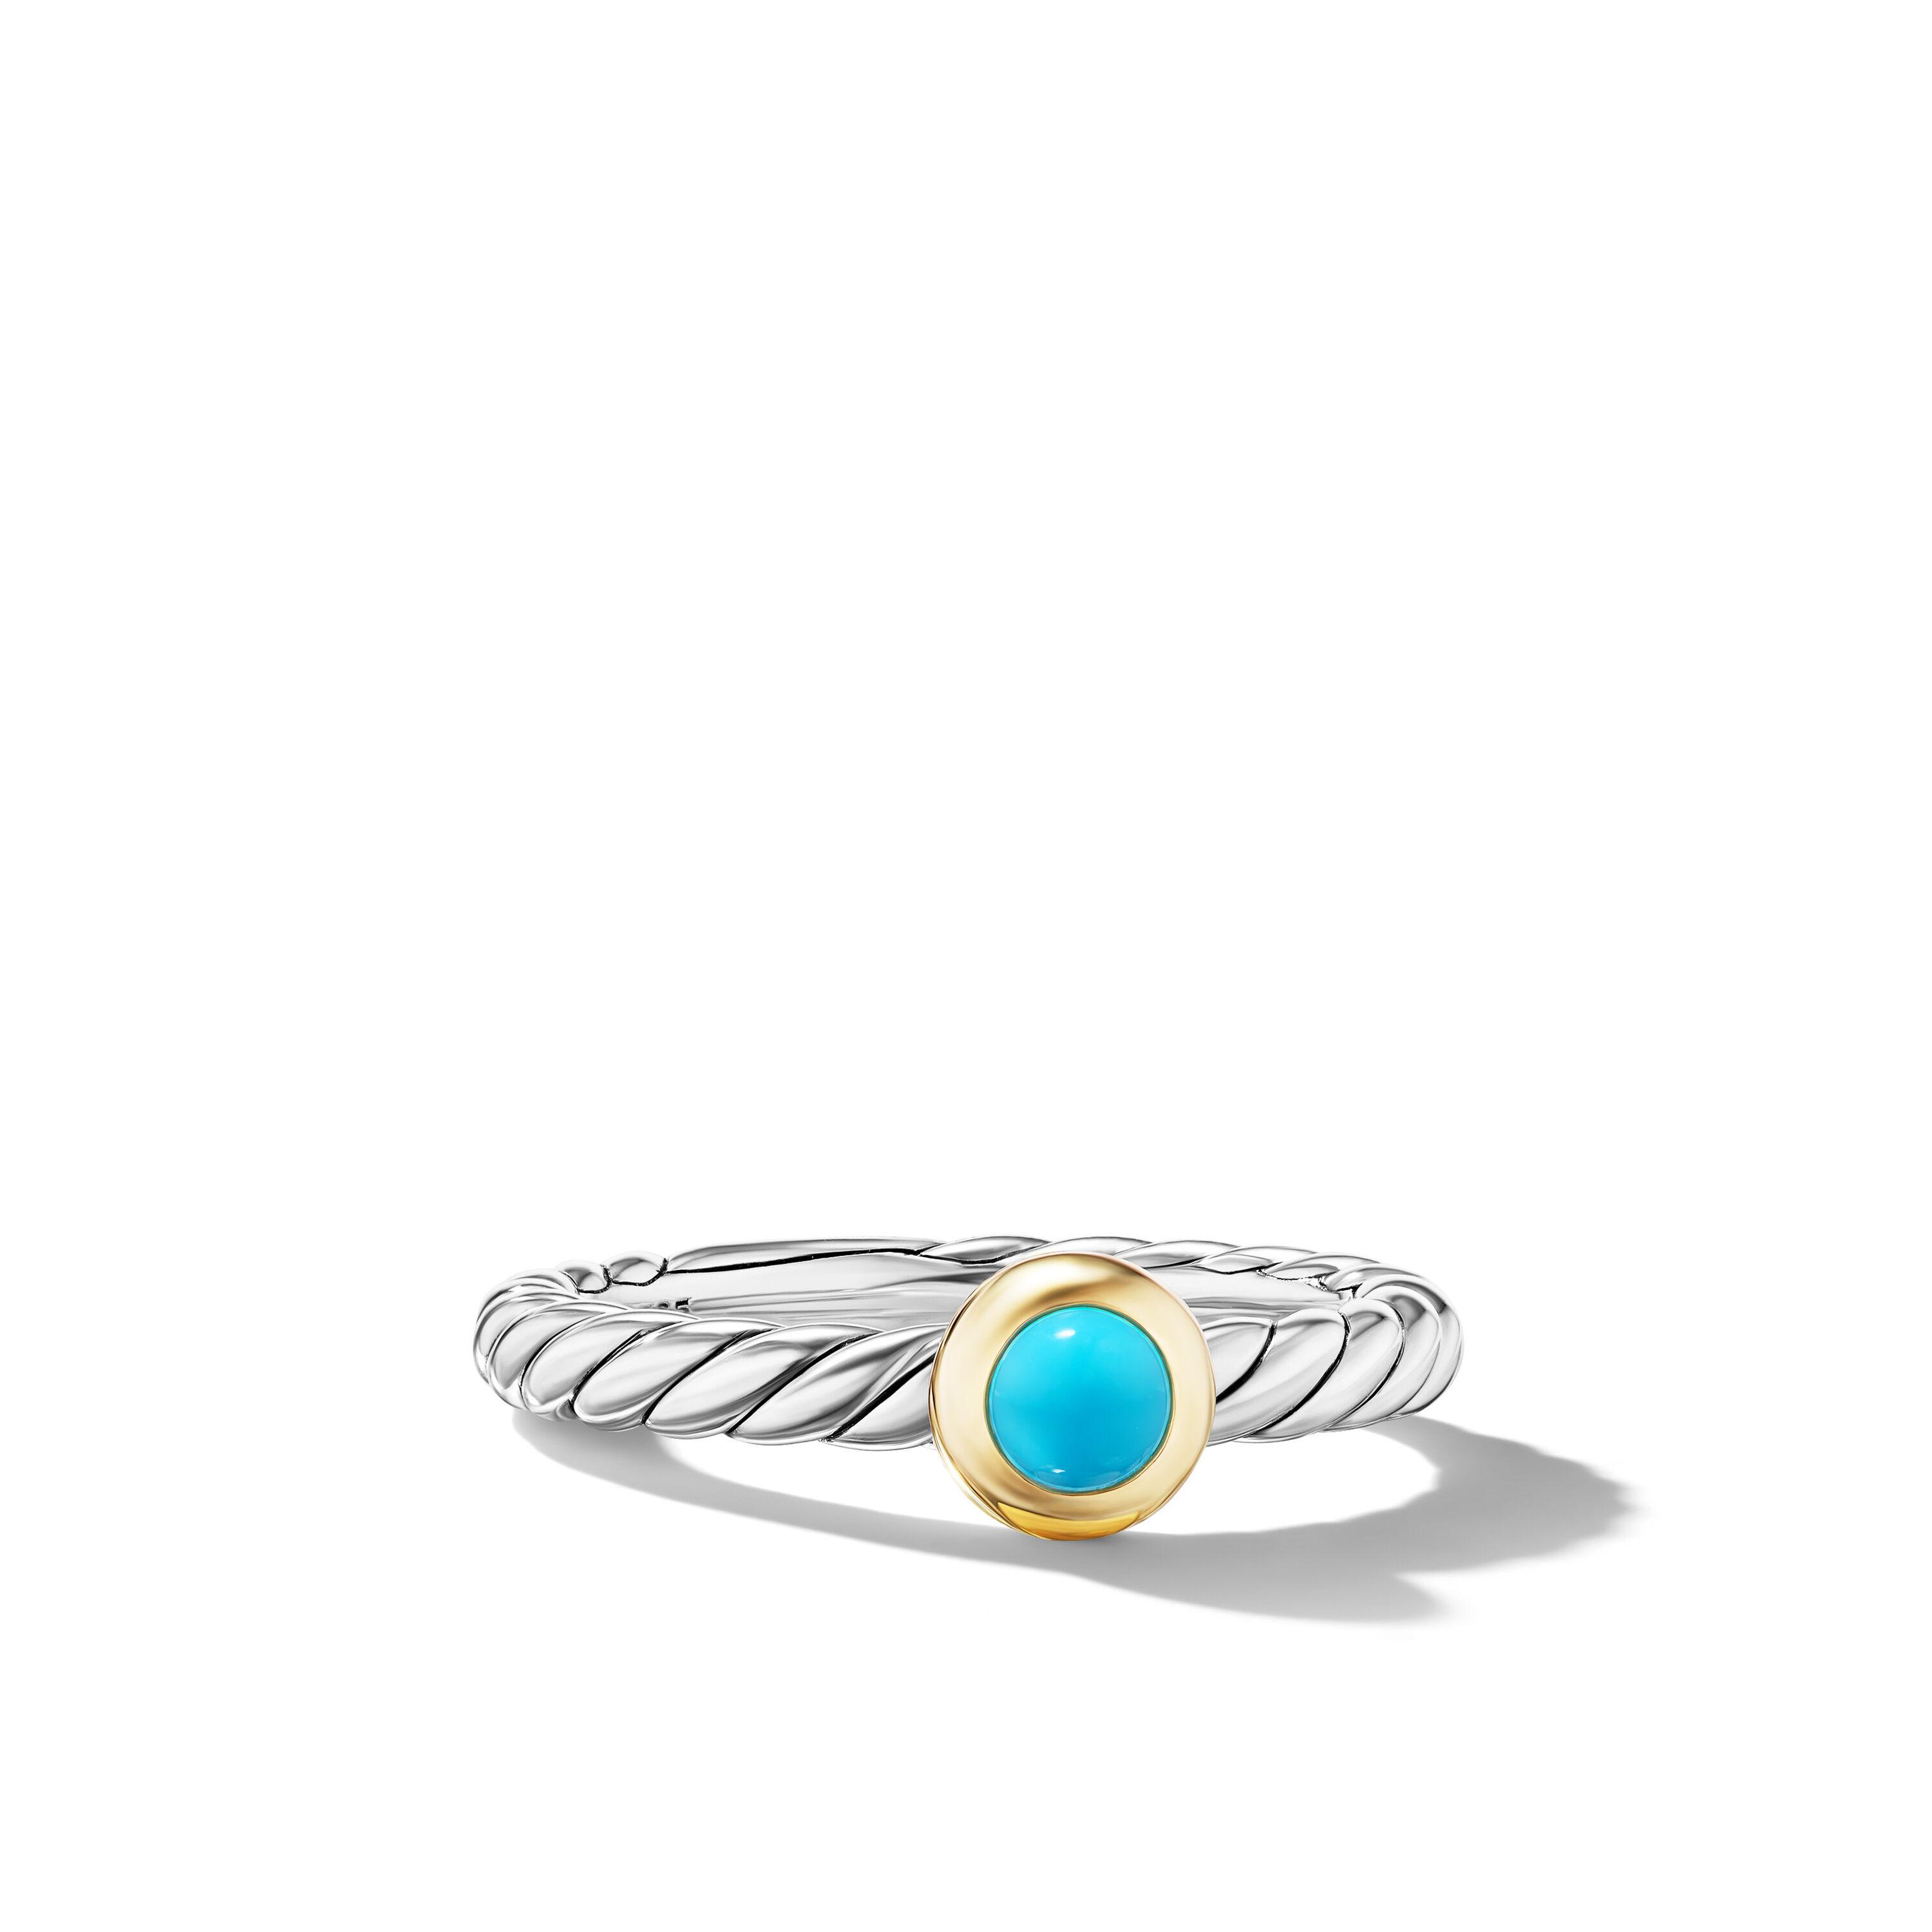 David Yurman Petite Cable Ring in Sterling Silver with 14K Yellow Gold and Turquoise, Size 6